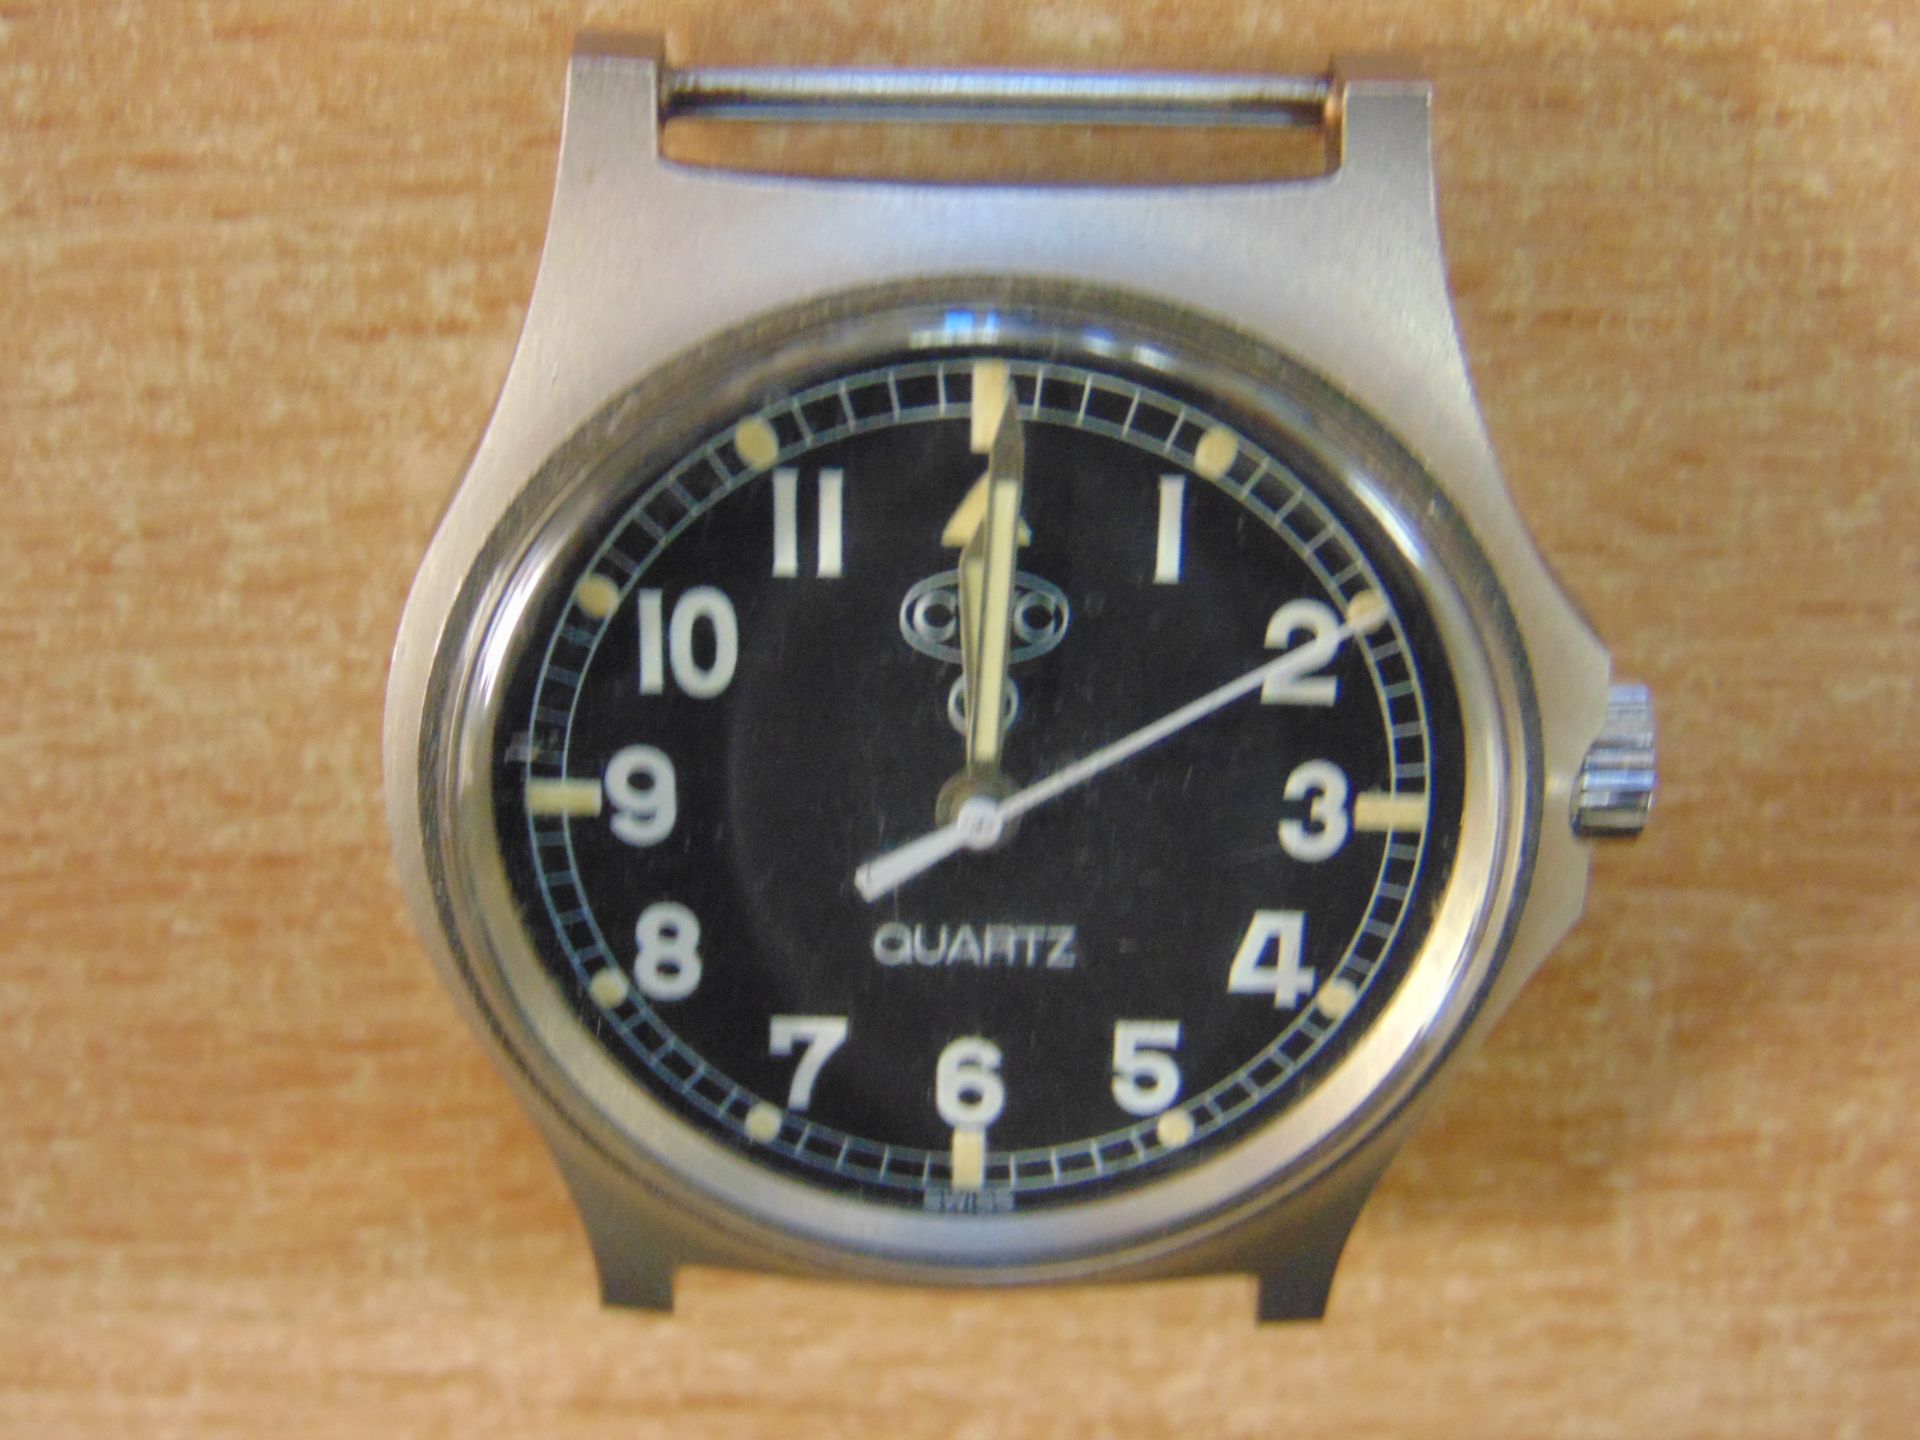 VERY RARE UNISSUED CWC W10 FAT BOY SERVICE WATCH NATO MARKED DATED 1982 - FALKLANDS WAR - Image 4 of 10